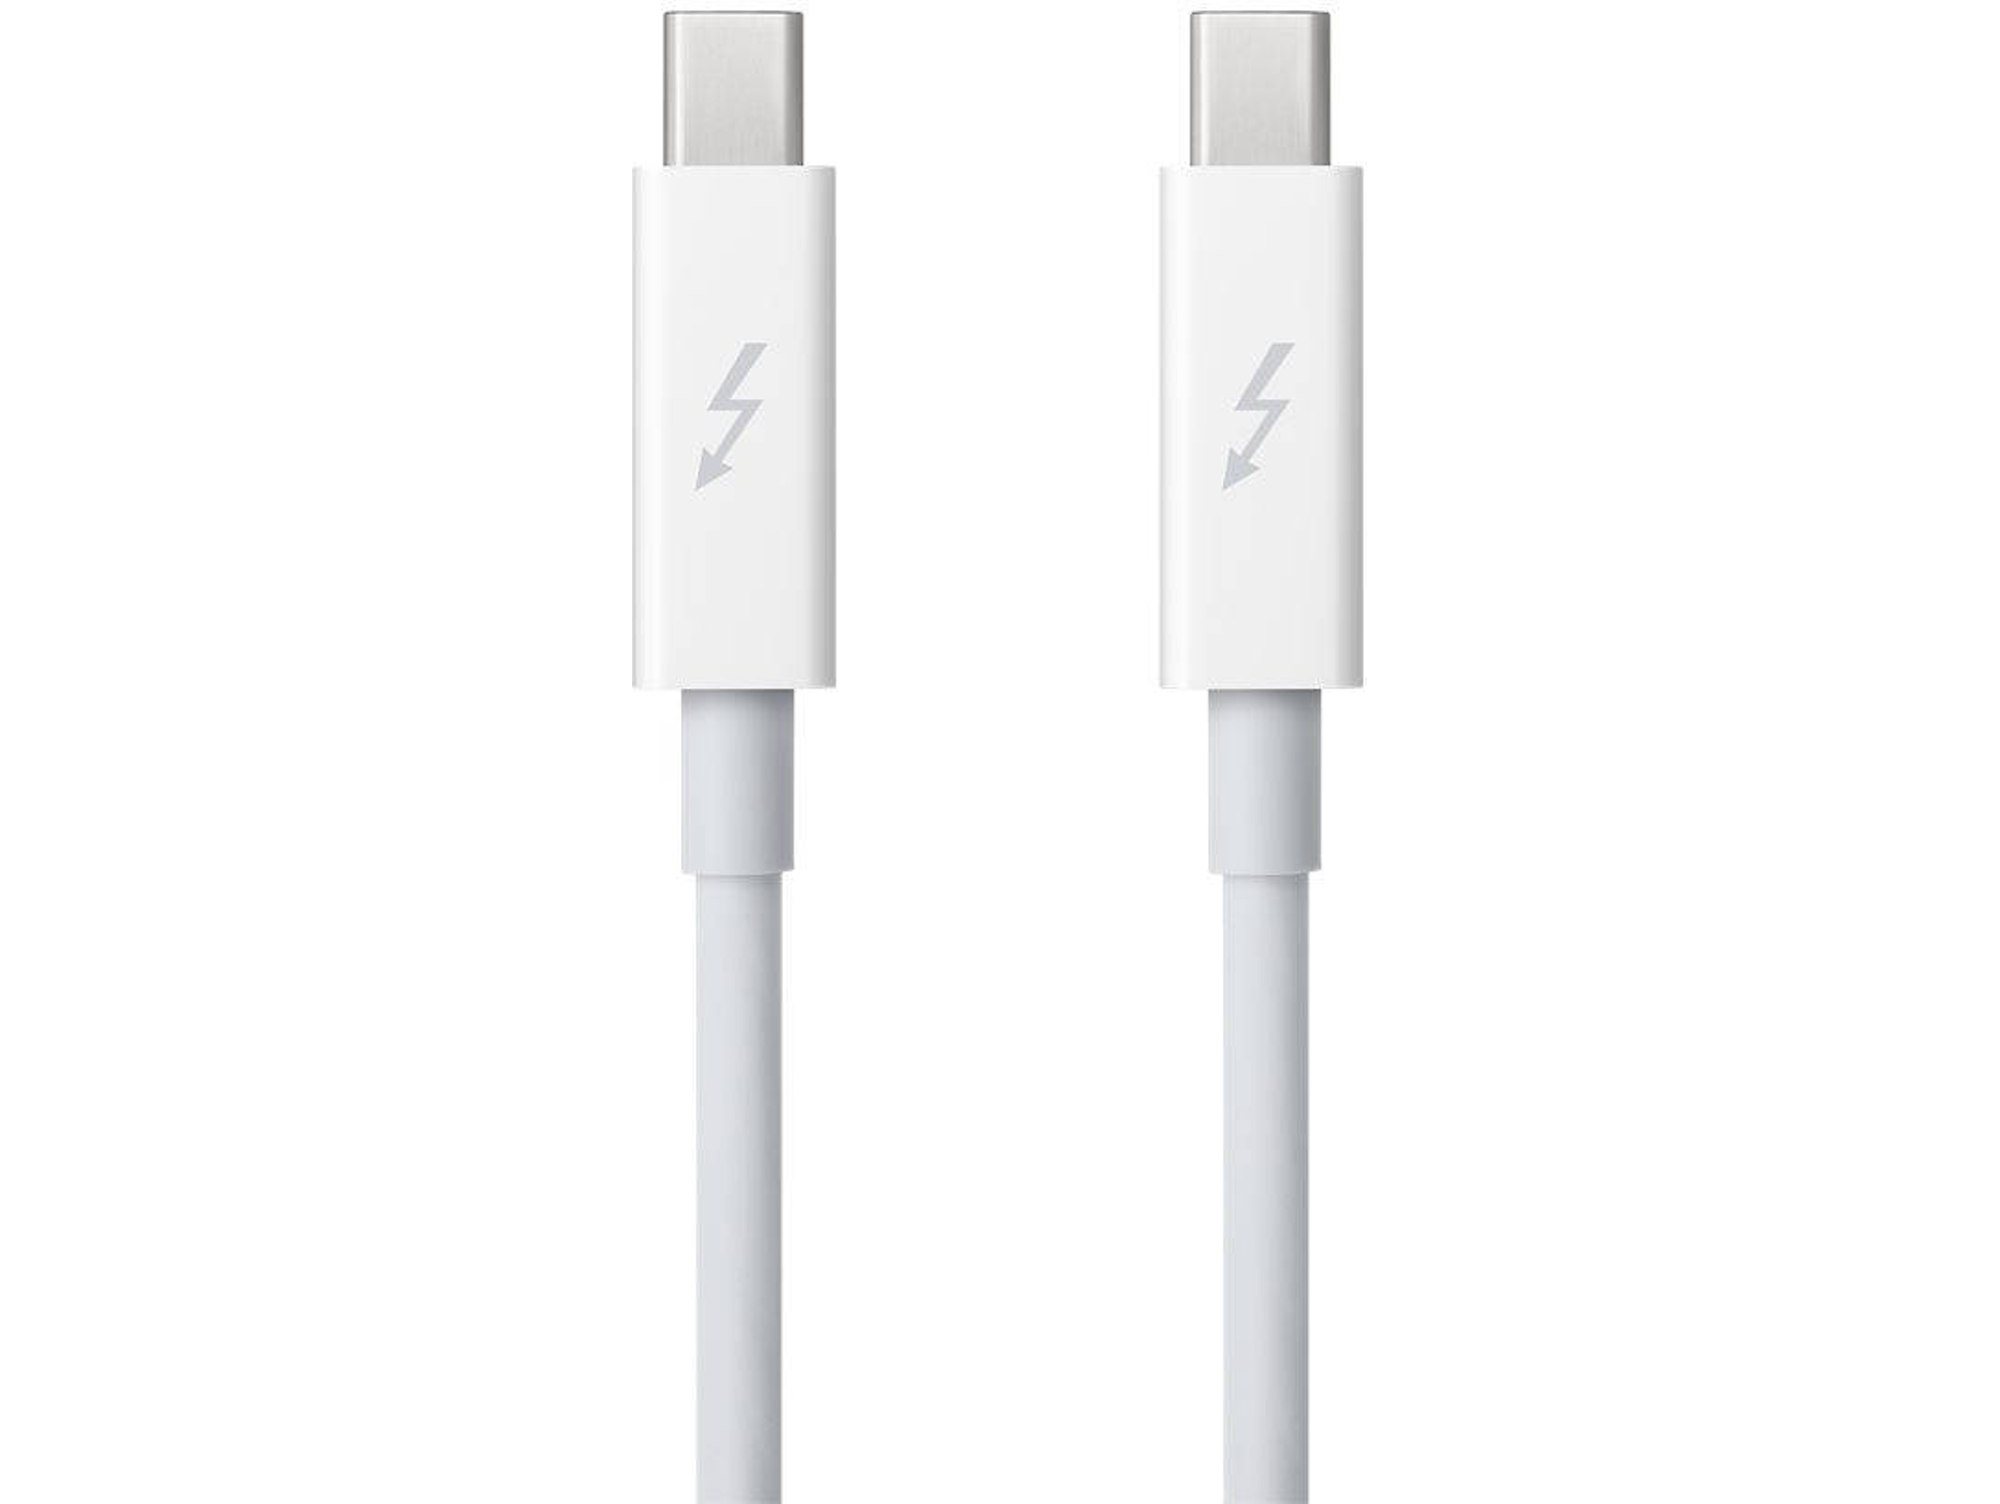 Cable APPLE Thunderbolt